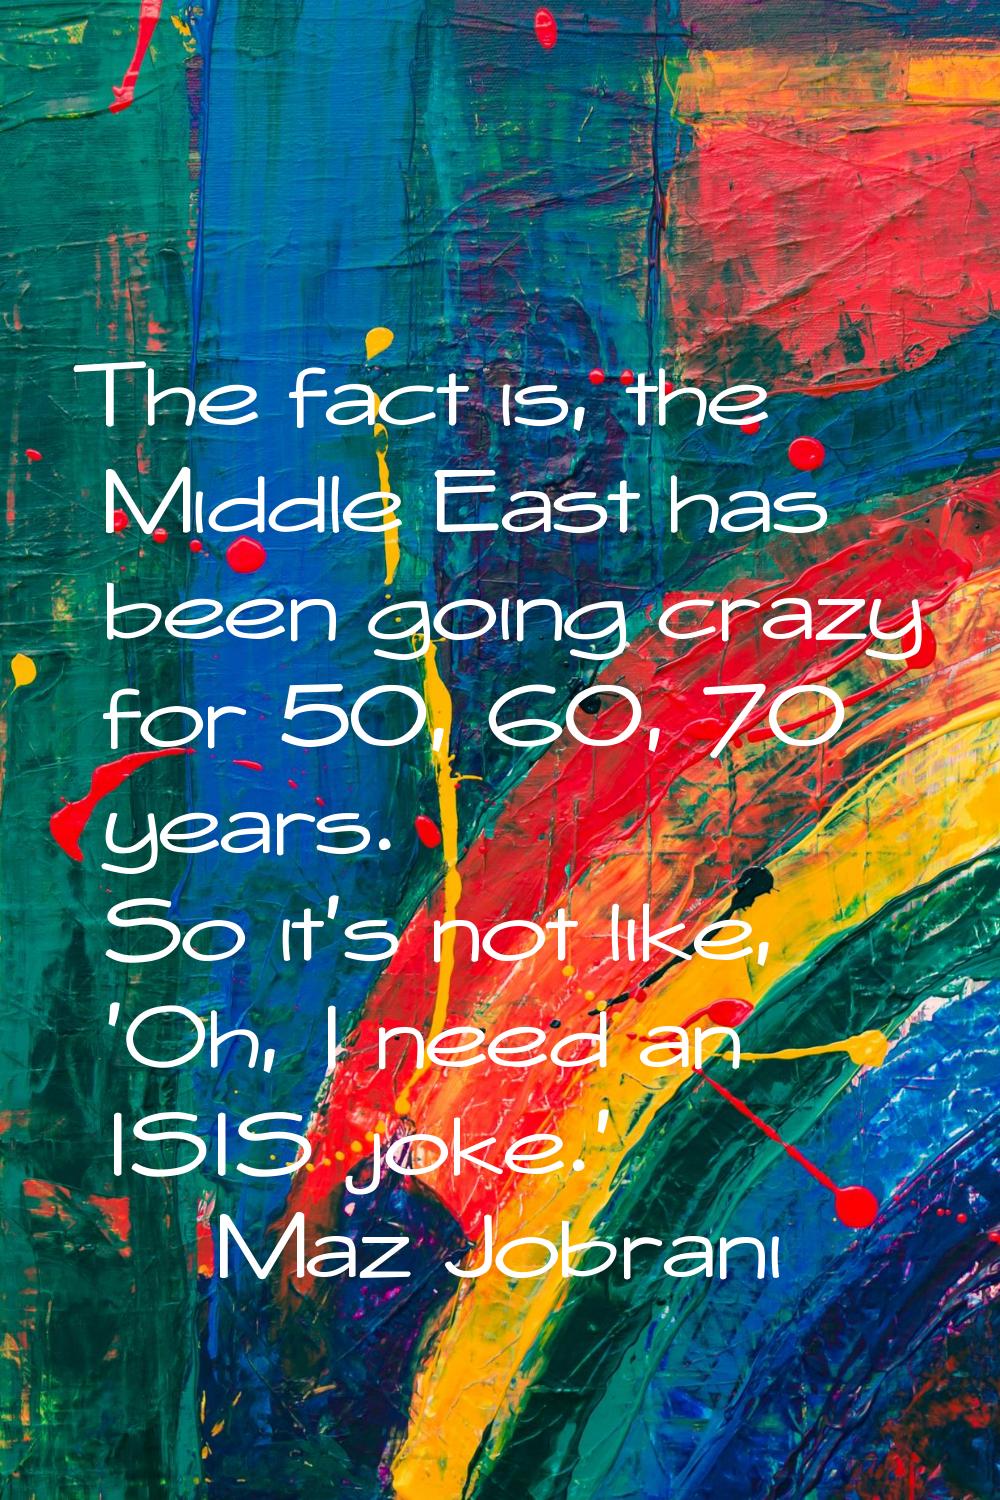 The fact is, the Middle East has been going crazy for 50, 60, 70 years. So it's not like, 'Oh, I ne